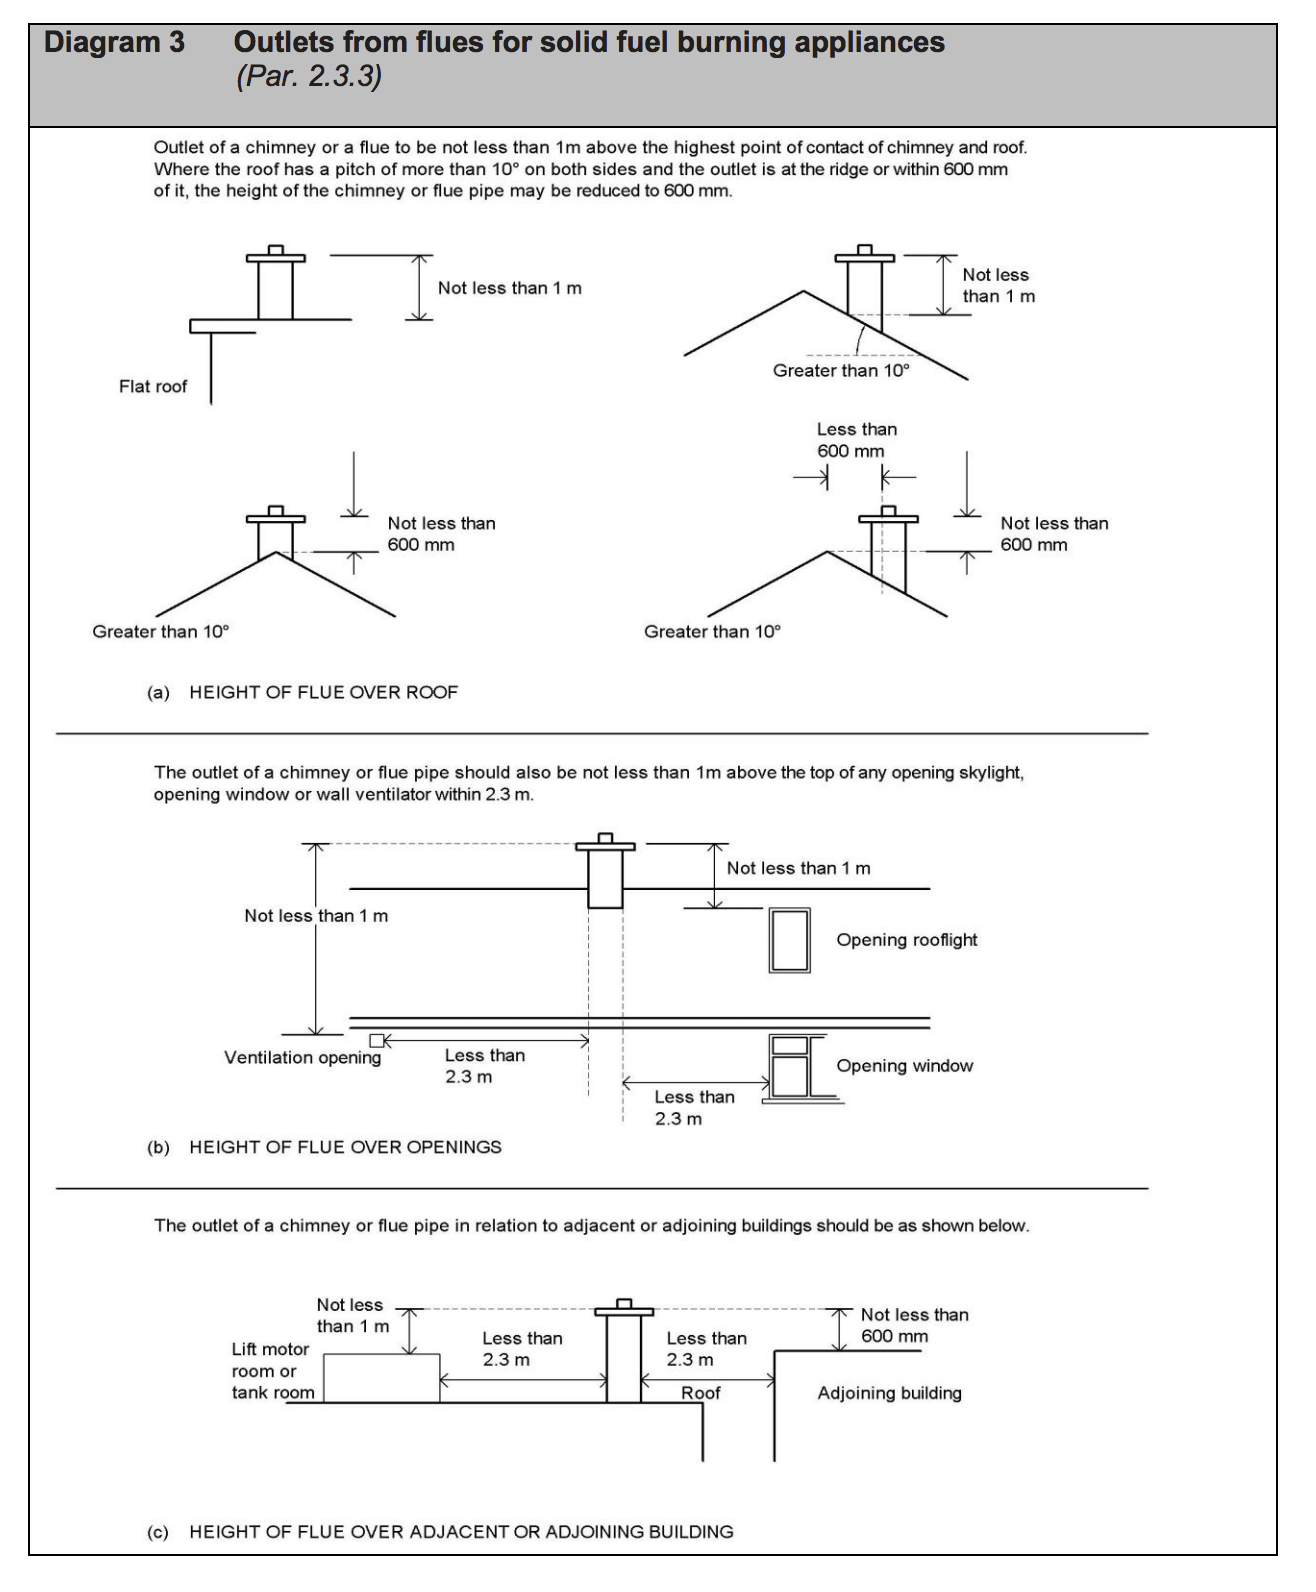 Diagram HJ3 - Outlets from flues for solid fuel burning appliances - Extract from TGD J